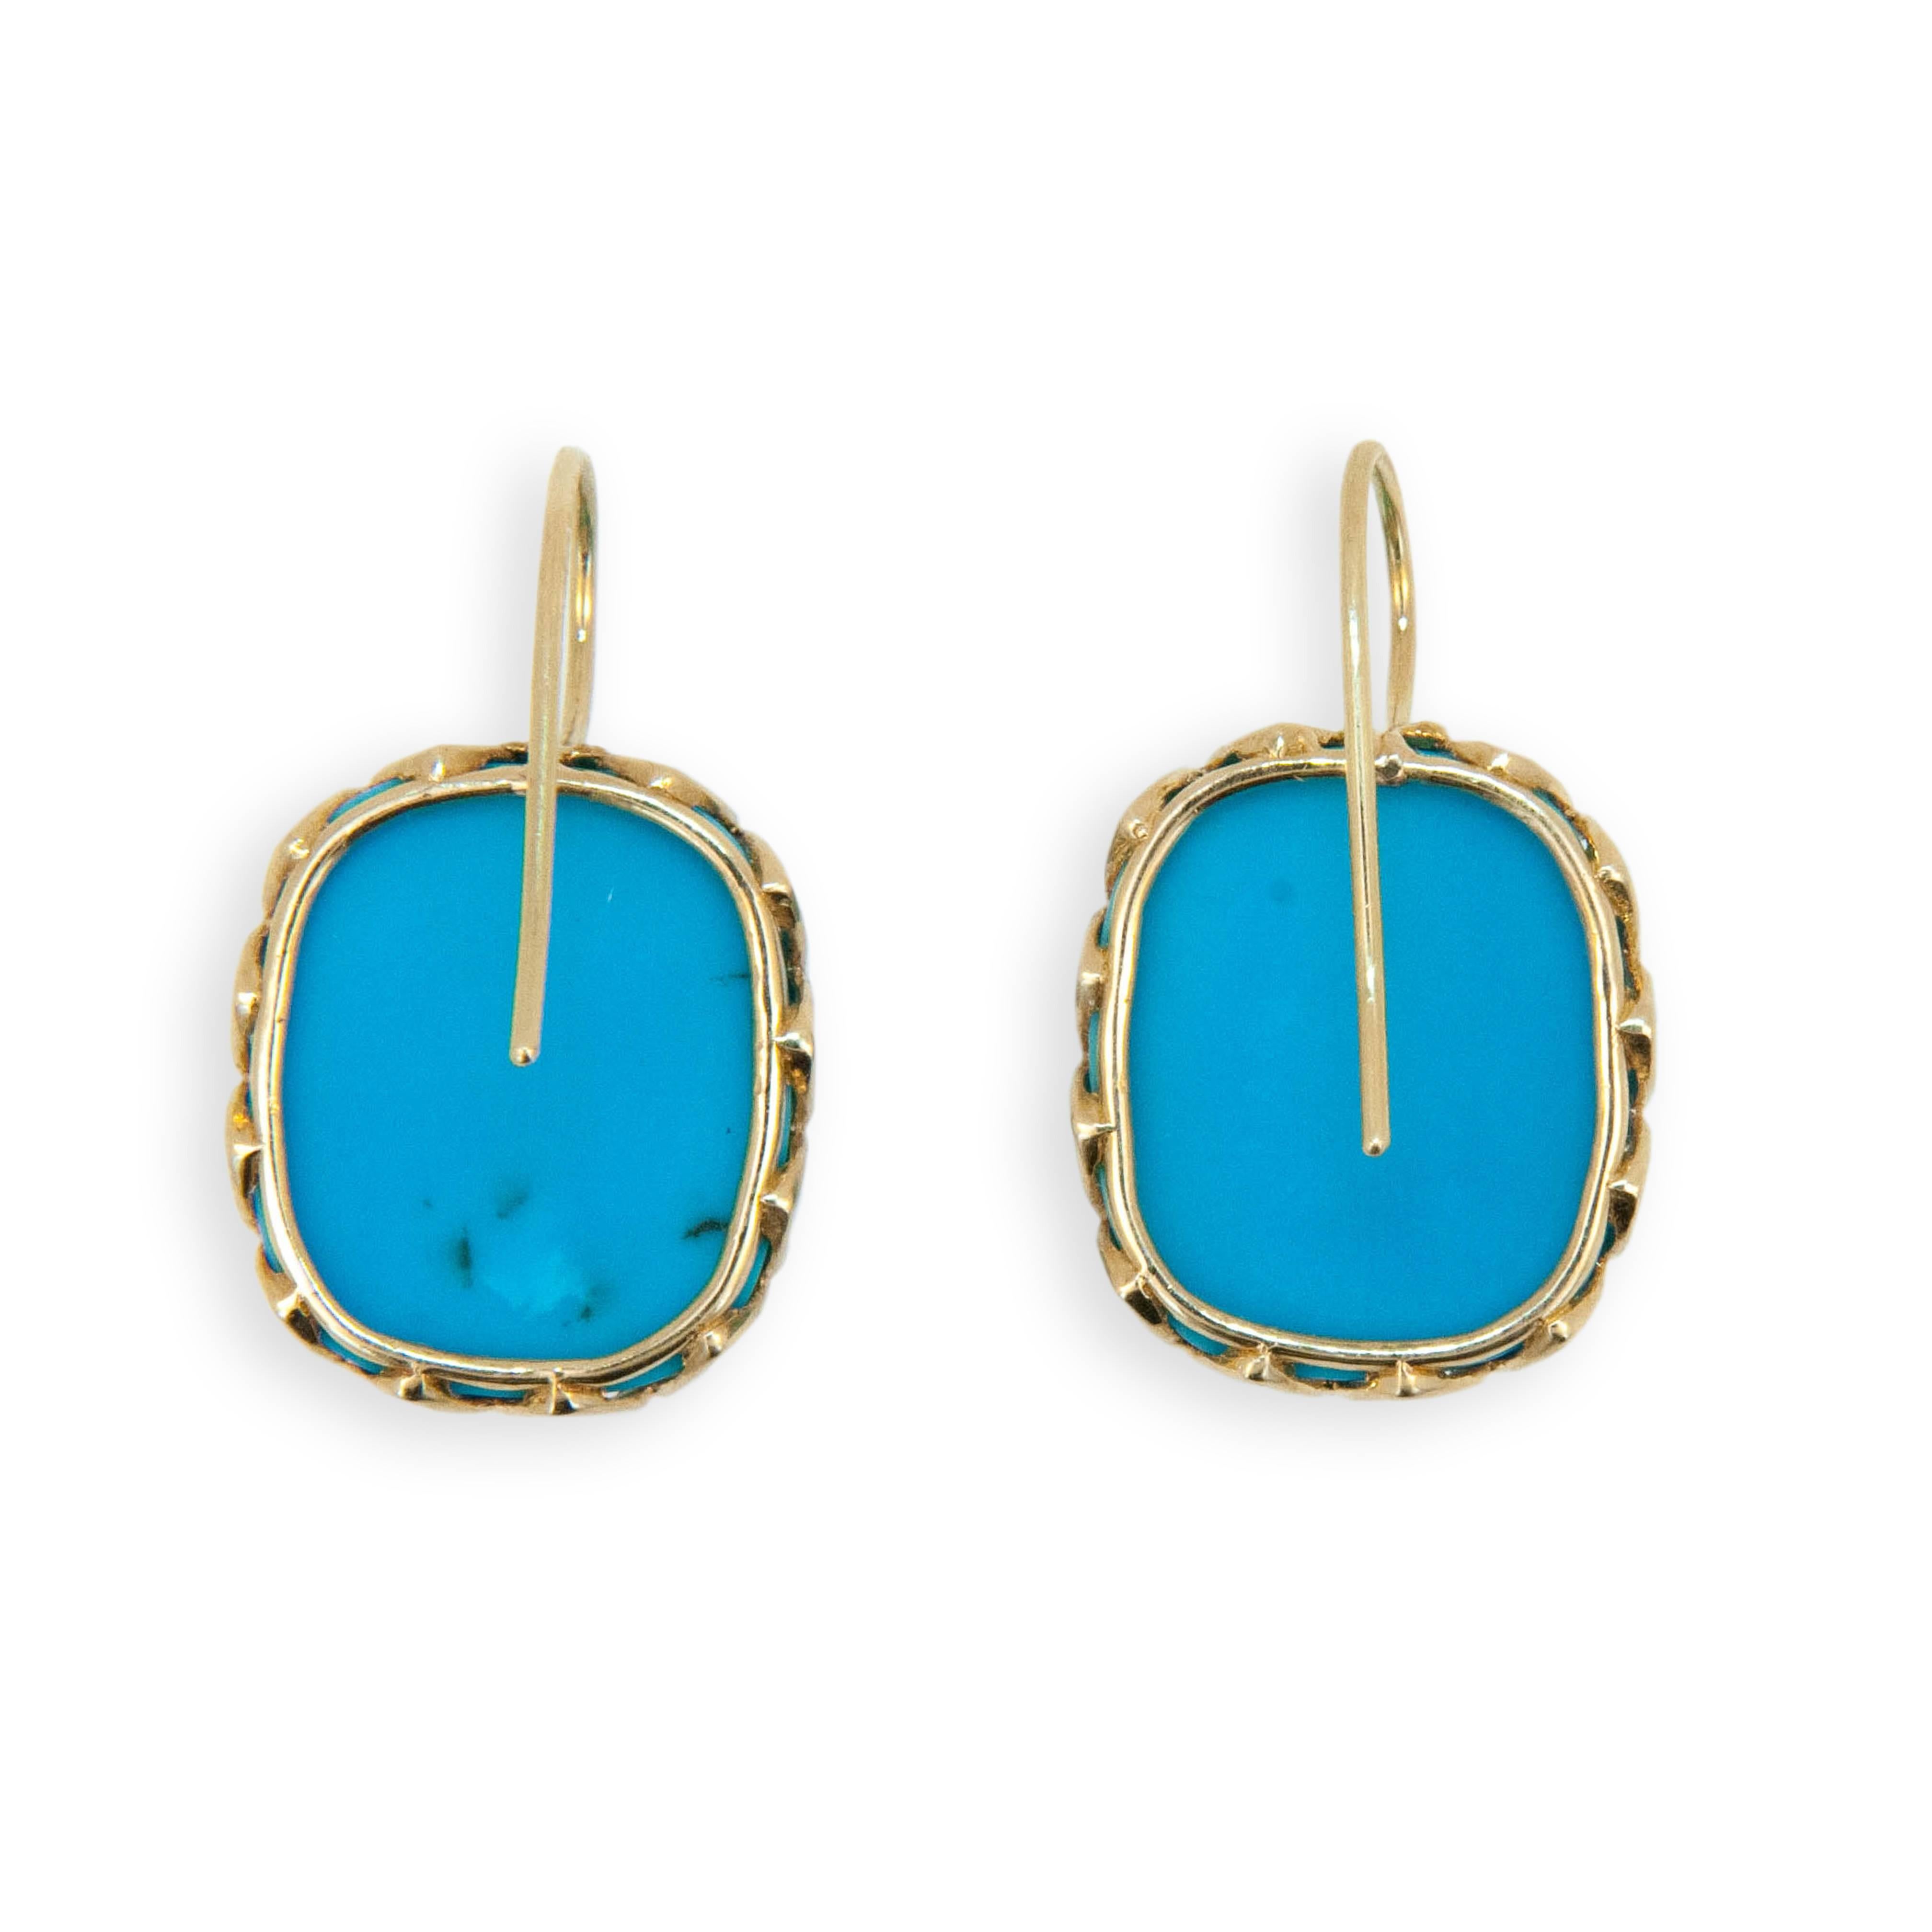 Cabochon Laura Munder Turquoise Yellow Gold Earrings